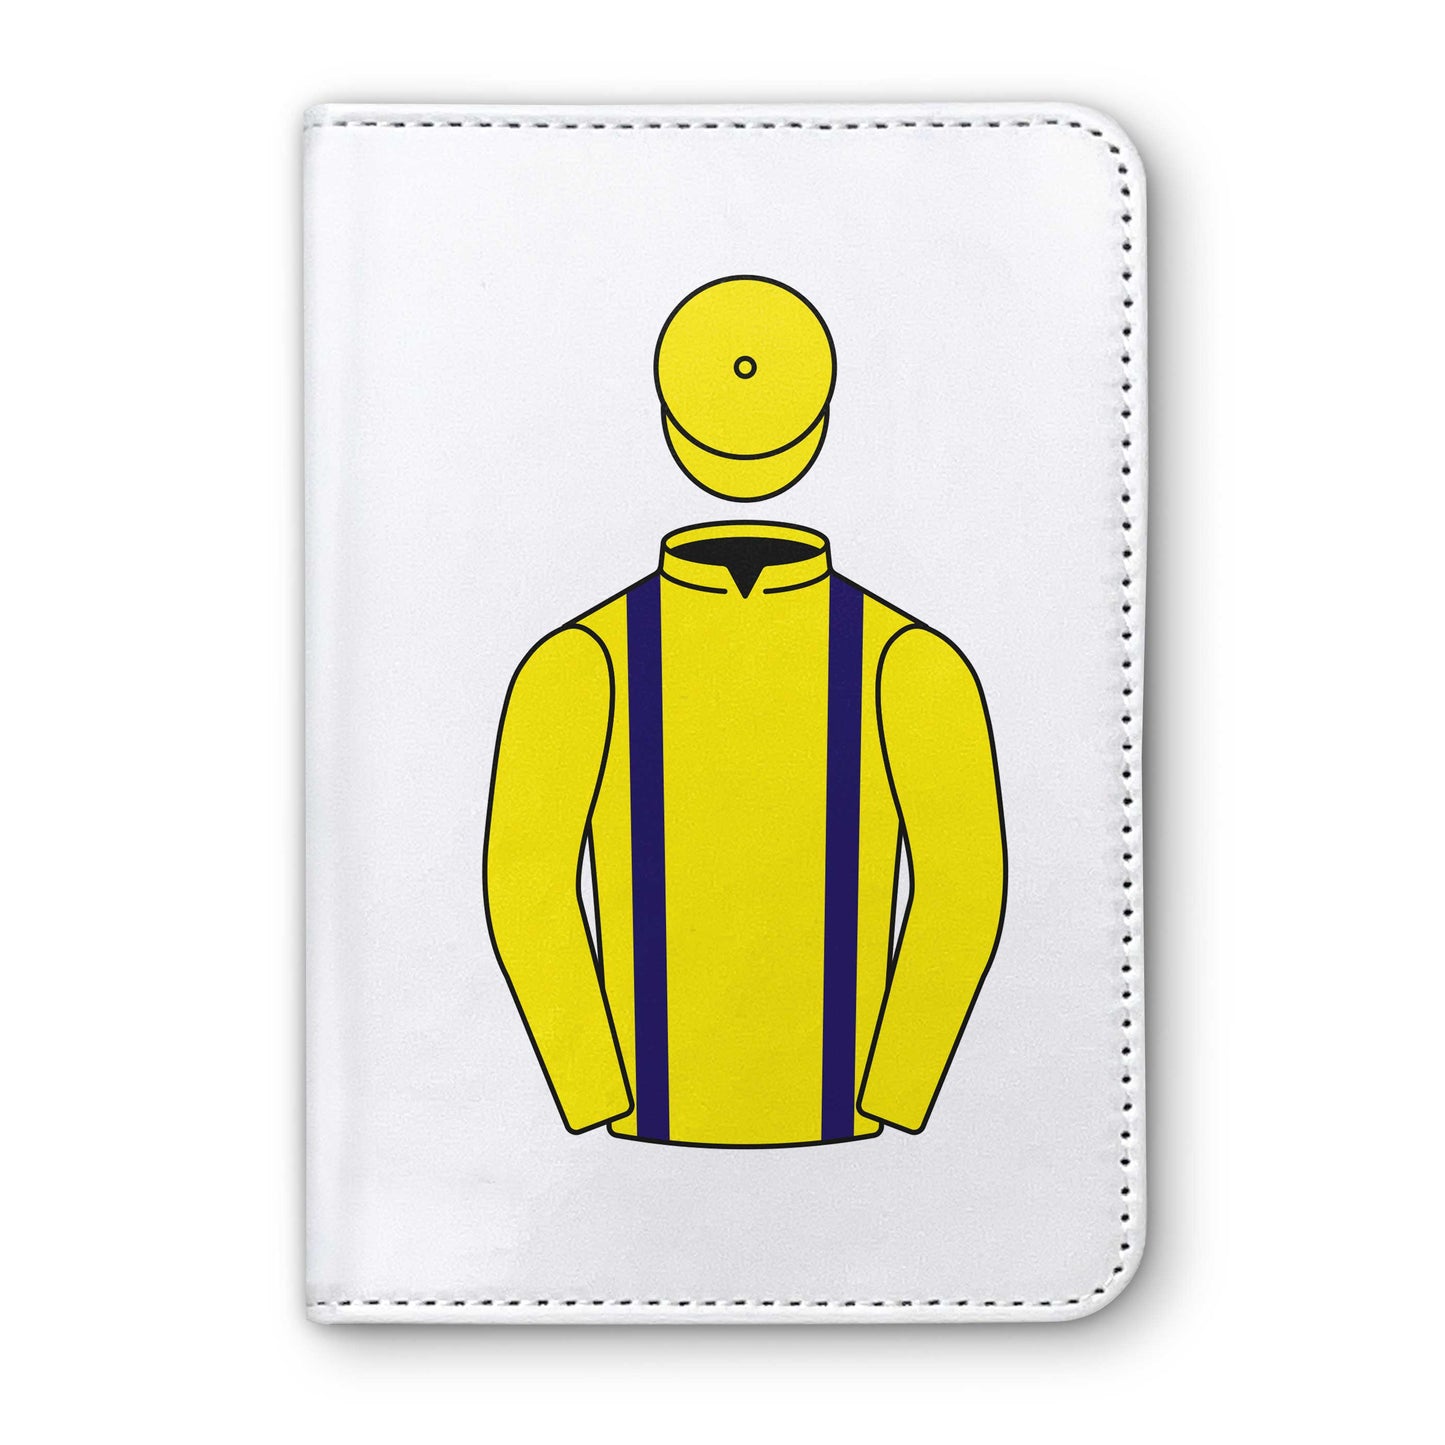 Taylor And O'Dwyer Horse Racing Passport Holder - Hacked Up Horse Racing Gifts